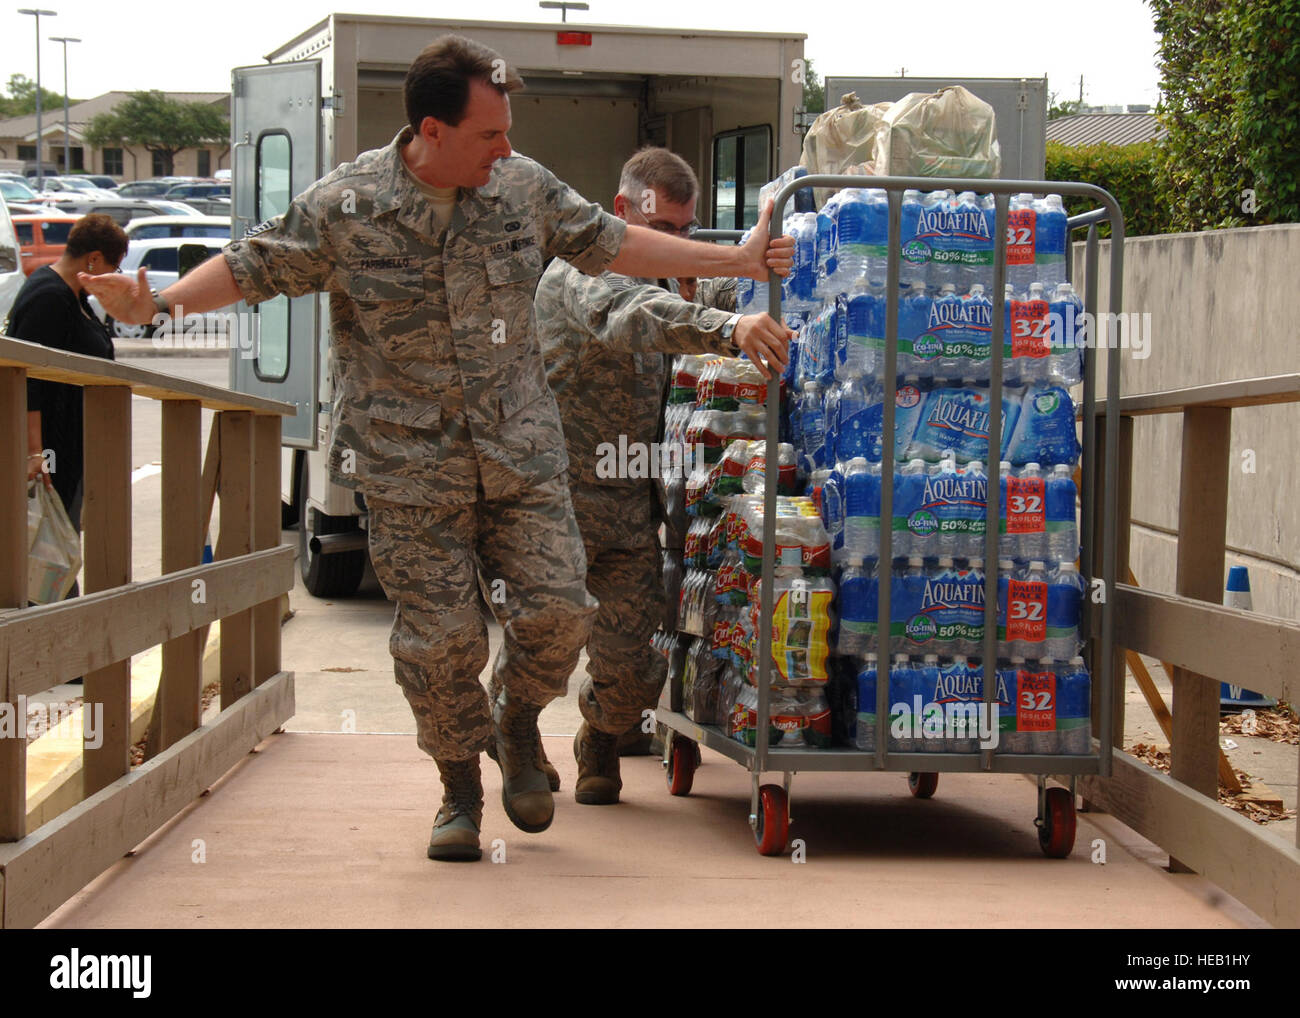 Tech. Sgt. Paul Parrinello helps fellow airmen pull a cart full of water up a ramp June 28, 2011, at Wilford Hall Medical Center Lackland Air Force Base, Texas. Parrinello was one of many volunteers to help load and unload donated goods from the American Red Cross, USO, Wounded Warriors, Pennies from Heaven, Evil Genius Racing, Blue Star Mom of San Antonio, RN Carolina Melfar of Sacramento, Calif., and WHMC Volunteer Services in support of the new CASF unit. Parrinello is from the 514th Aero Medical Staging Squadron as a Medical Technician. Stock Photo